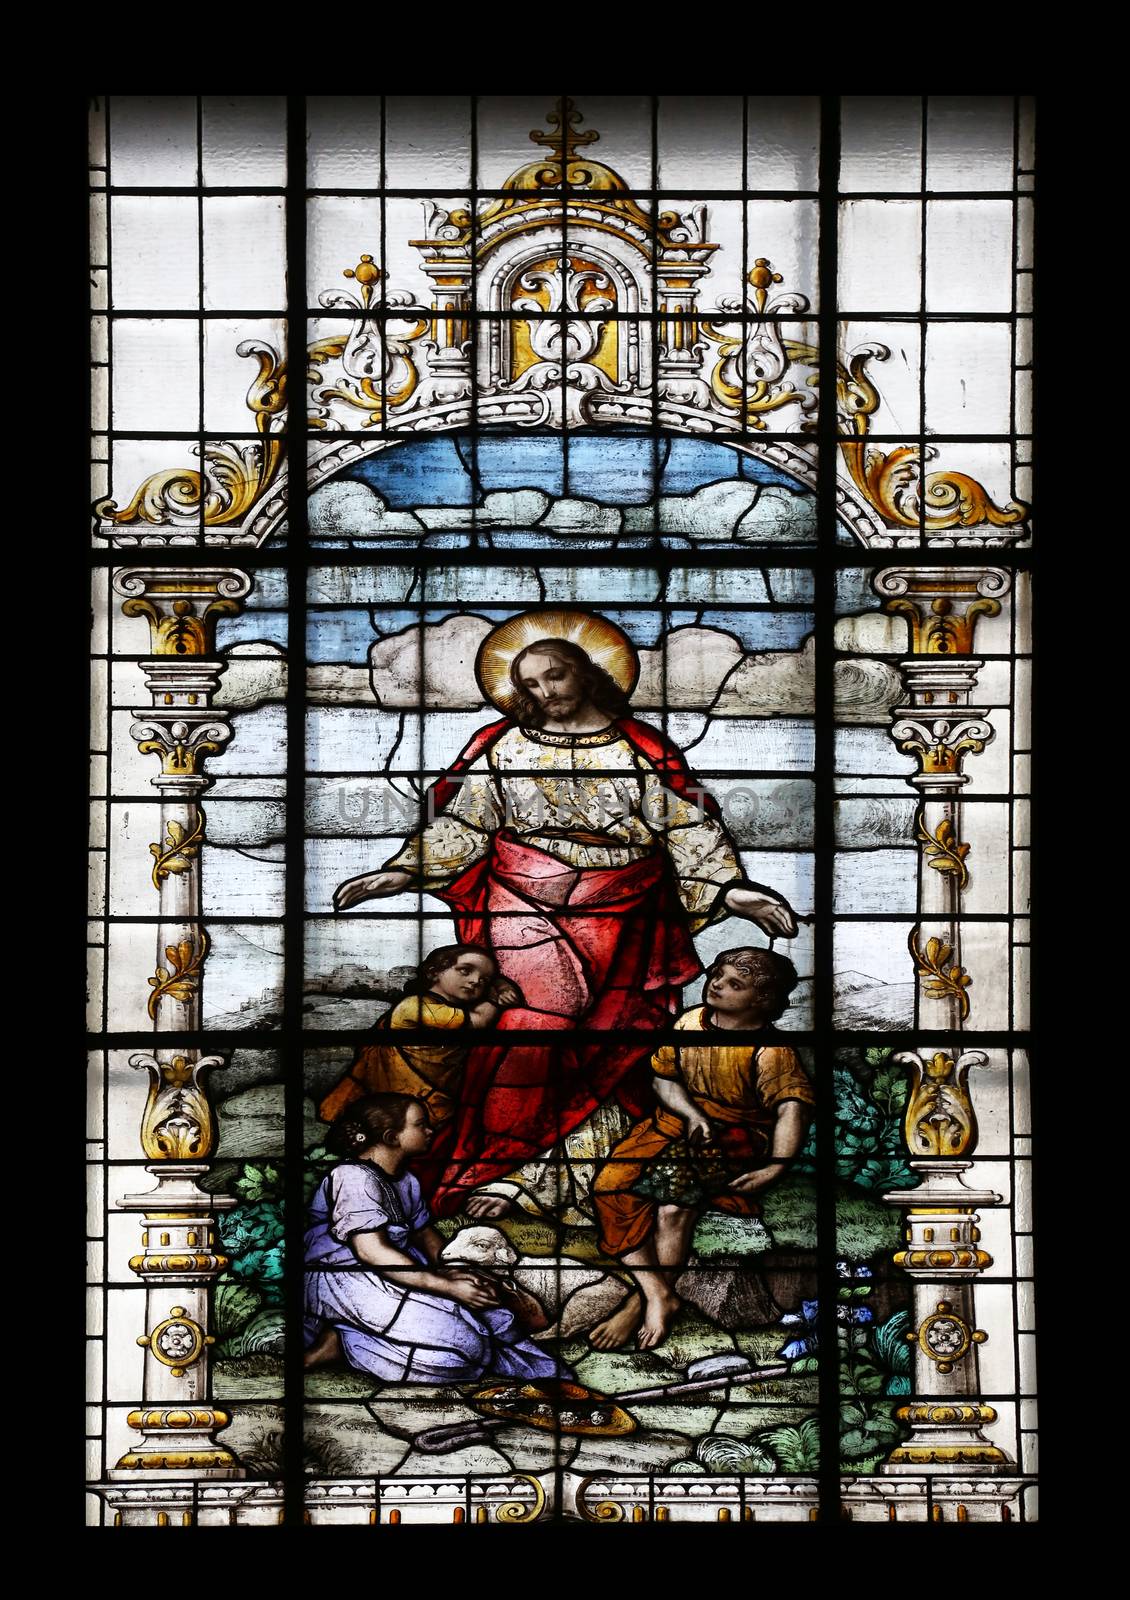 Jesus friend of the children, stained glass window in the Basilica of the Sacred Heart of Jesus in Zagreb, Croatia on December 27, 2013